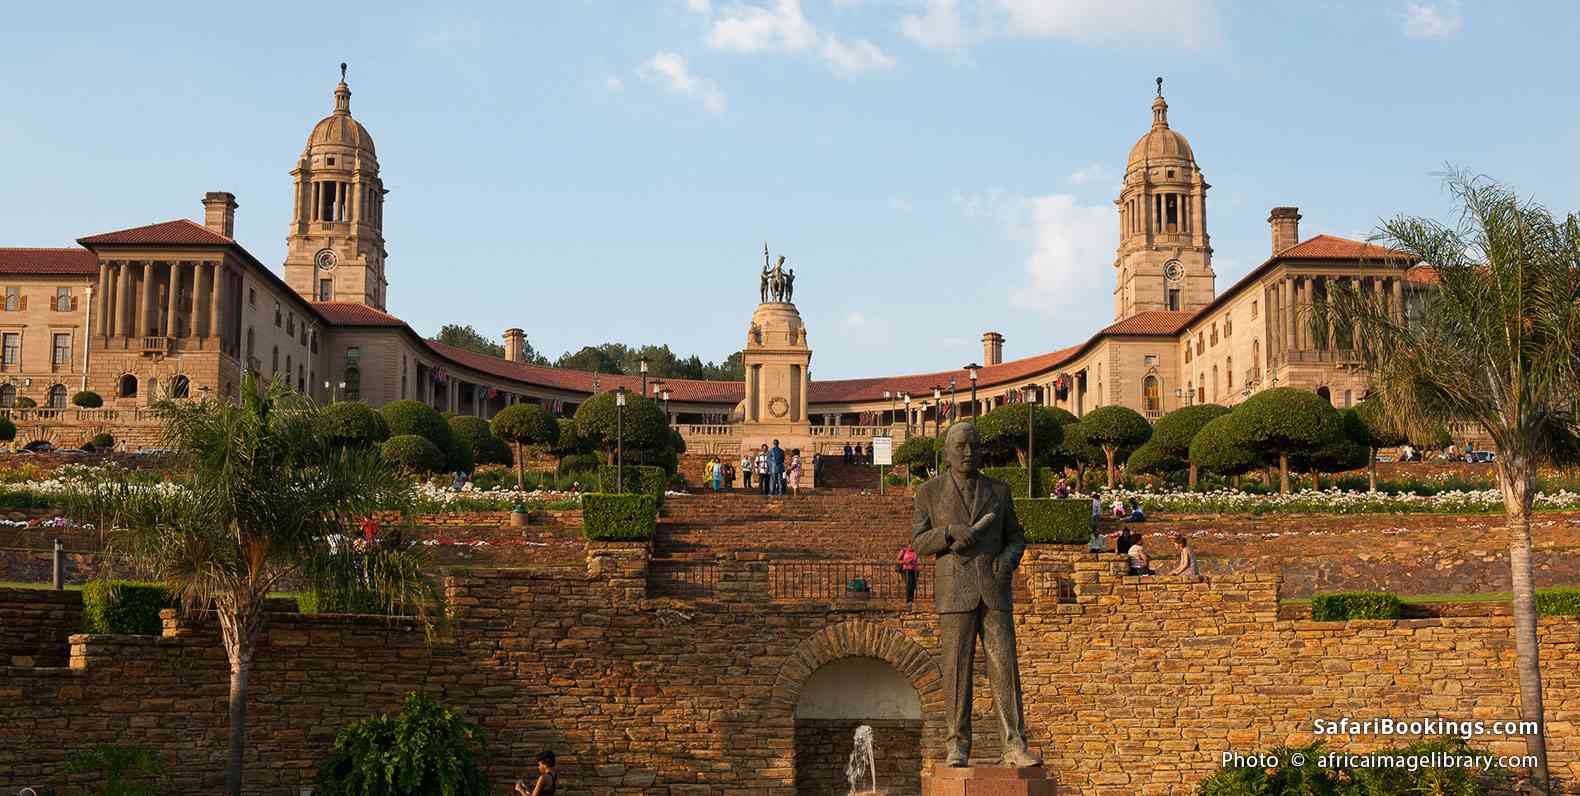 The Union Buildings form the official seat of the South African Government